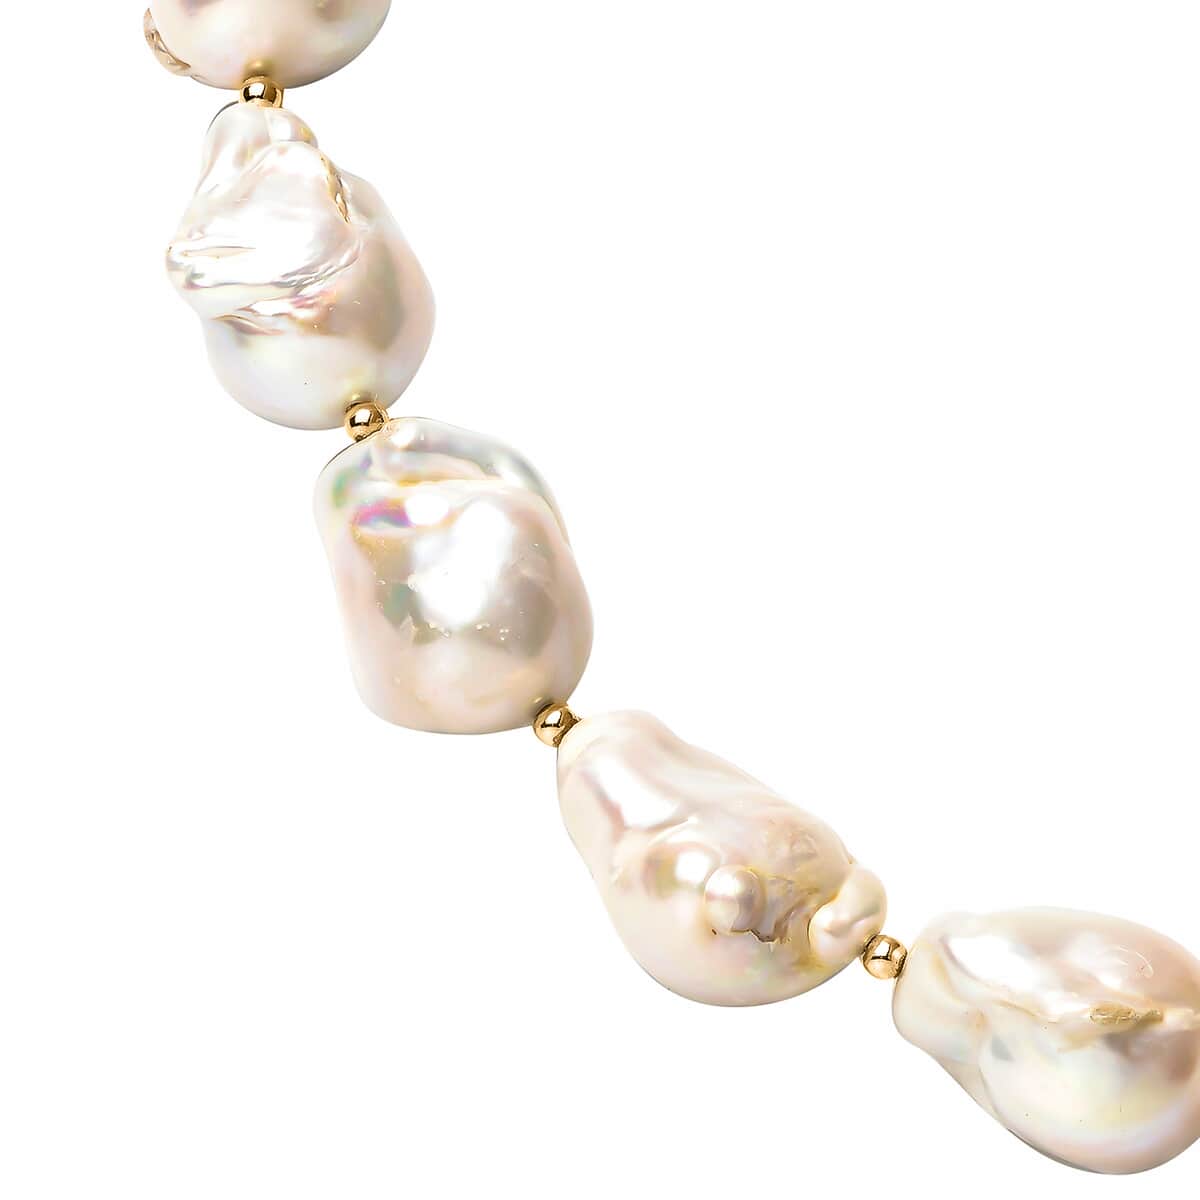 Organic Shape Baroque Pearl Necklace 20 Inches in 14K YG Over Sterling Silver 7 Grams image number 2